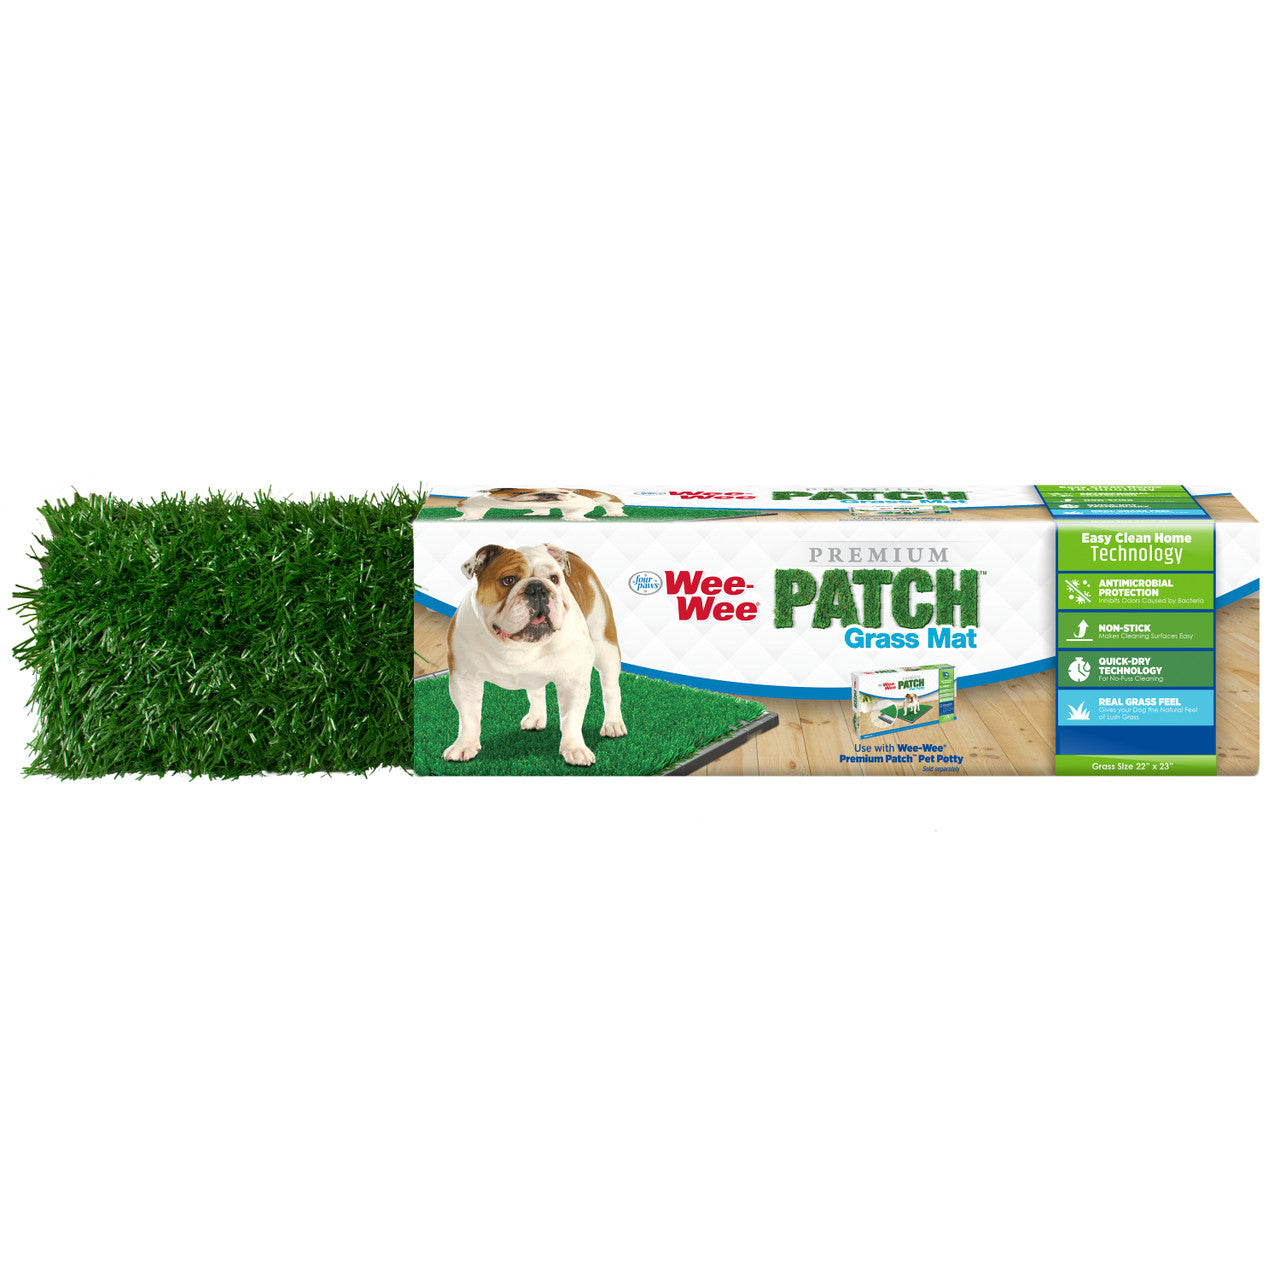 Four Paws Wee-Wee Premium Patch Grass Mat for Dogs, 22" x 23" (1 Count)